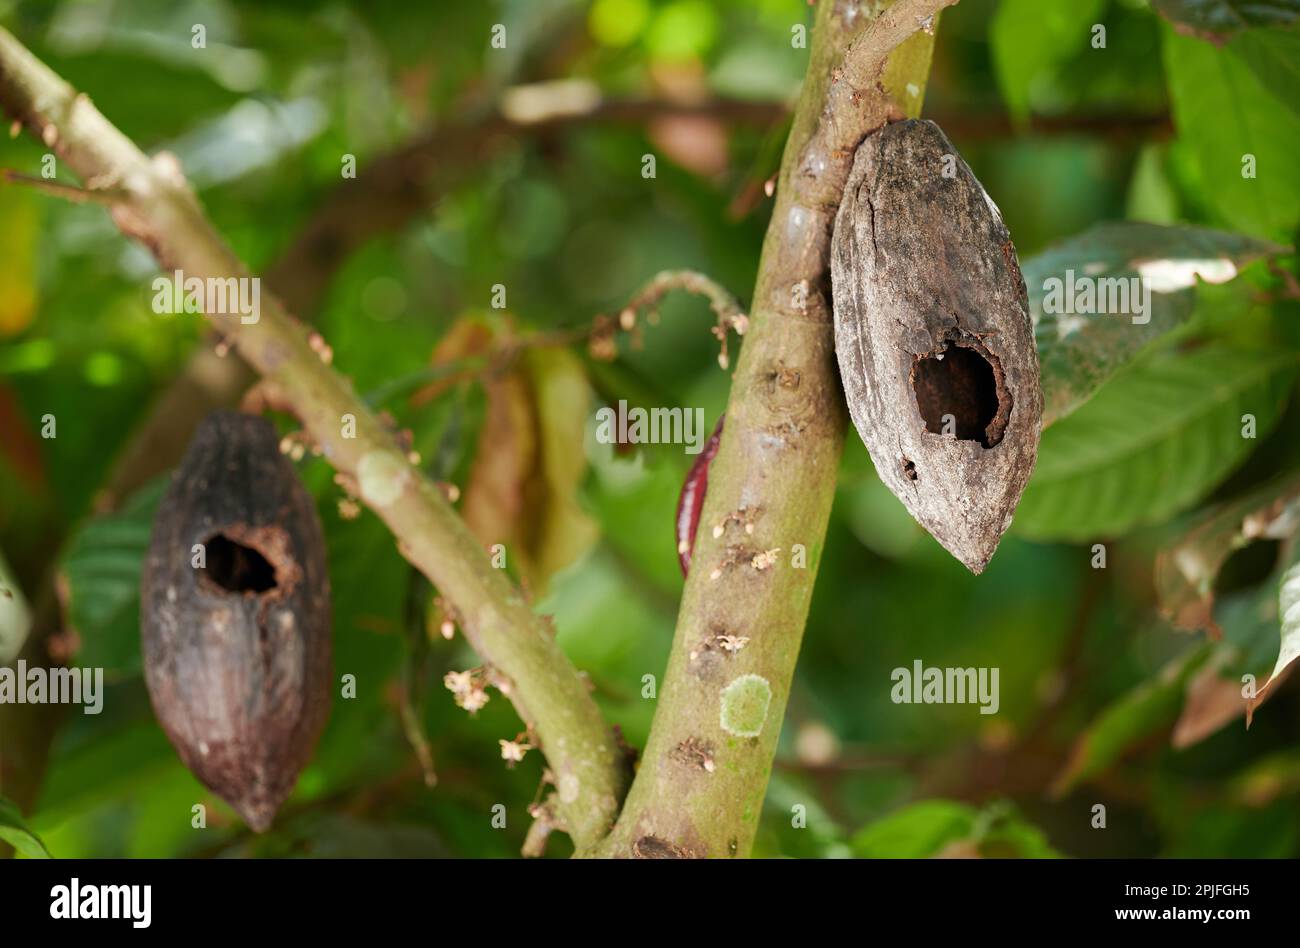 Cacao fungus Disease theme macro close up view on blurred green leaf background Stock Photo